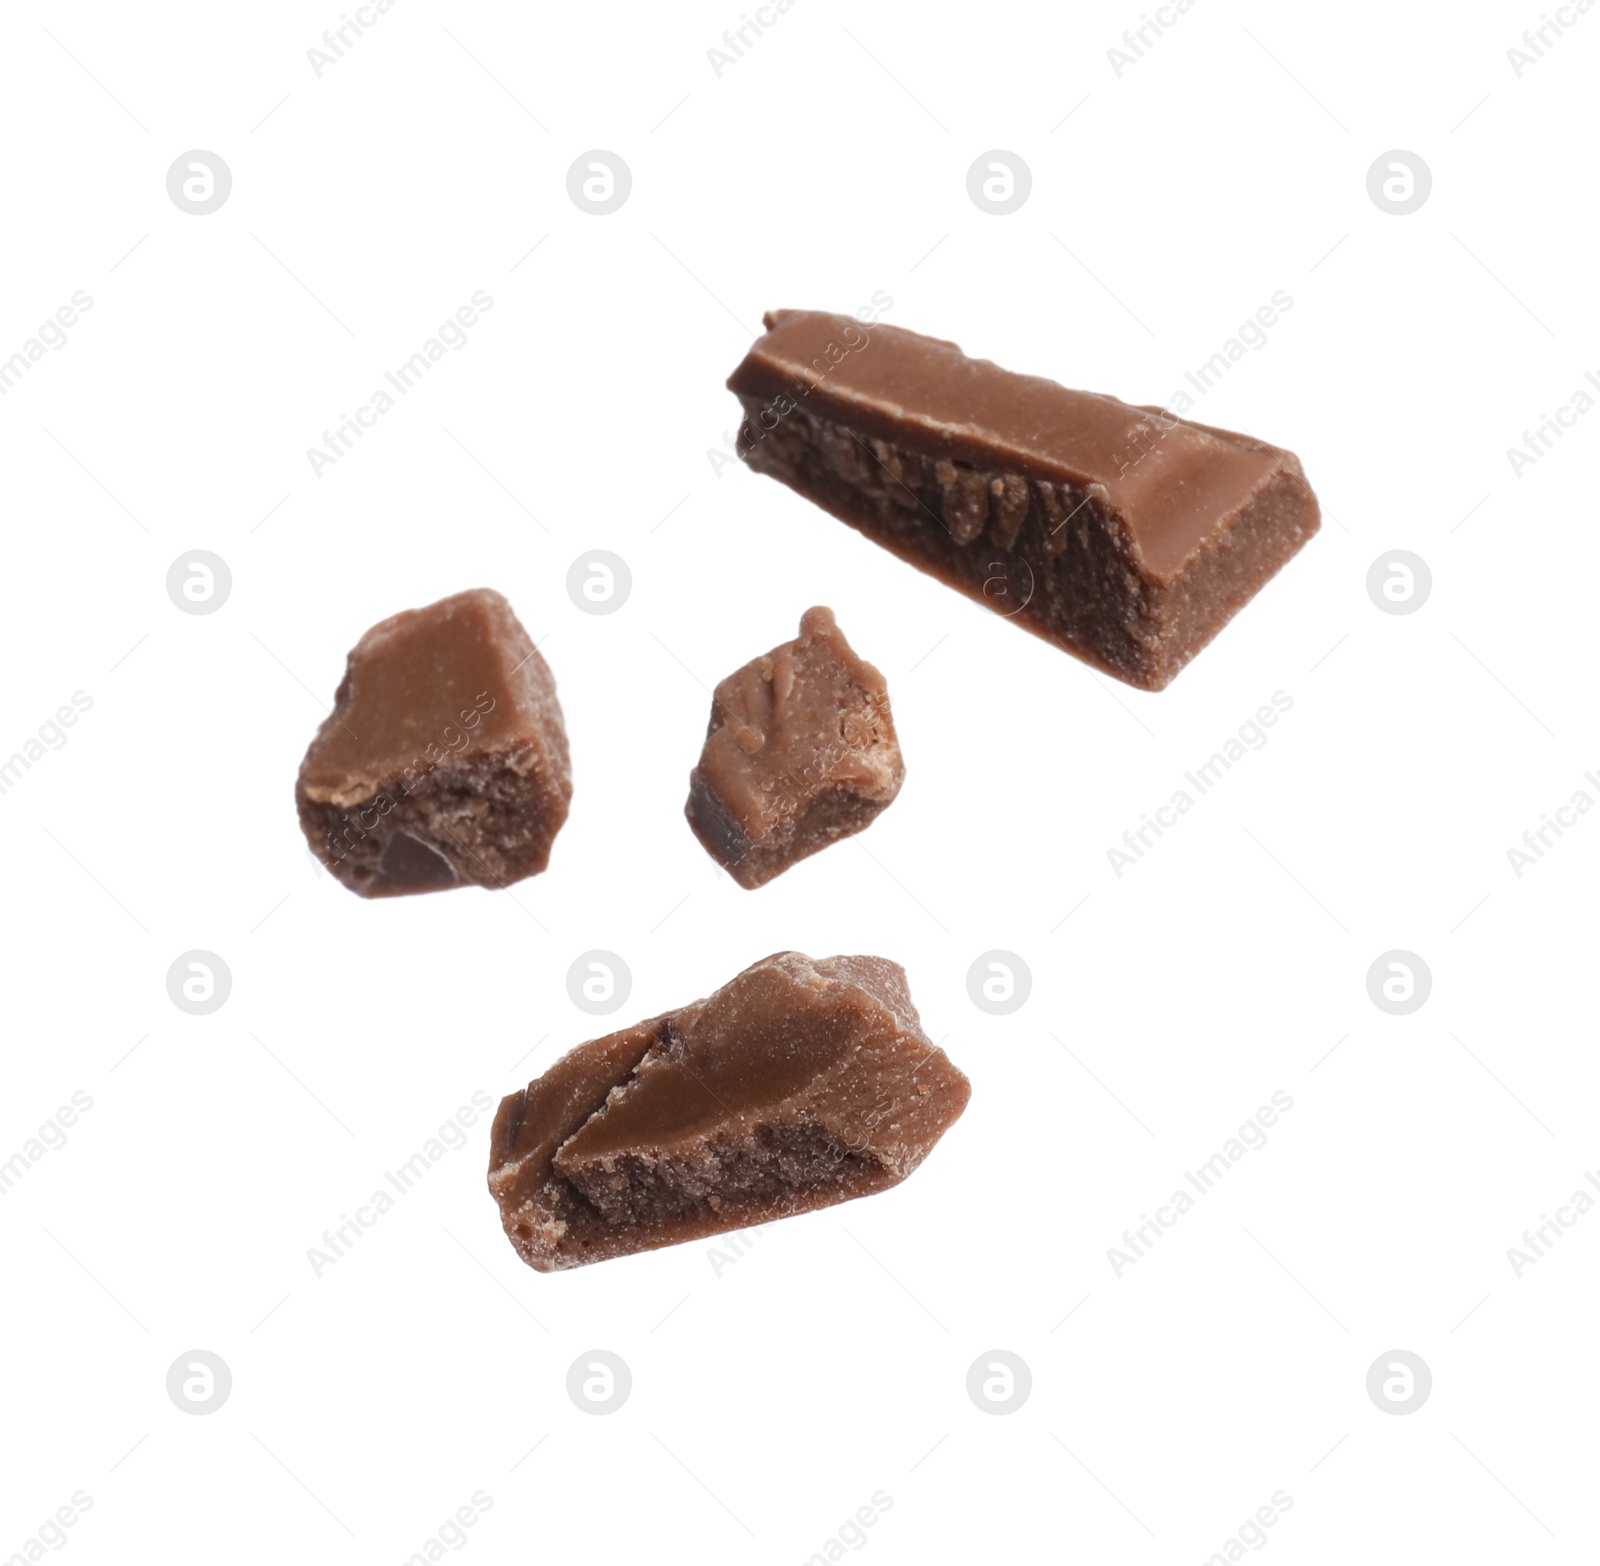 Photo of Pieces of tasty chocolate bar isolated on white